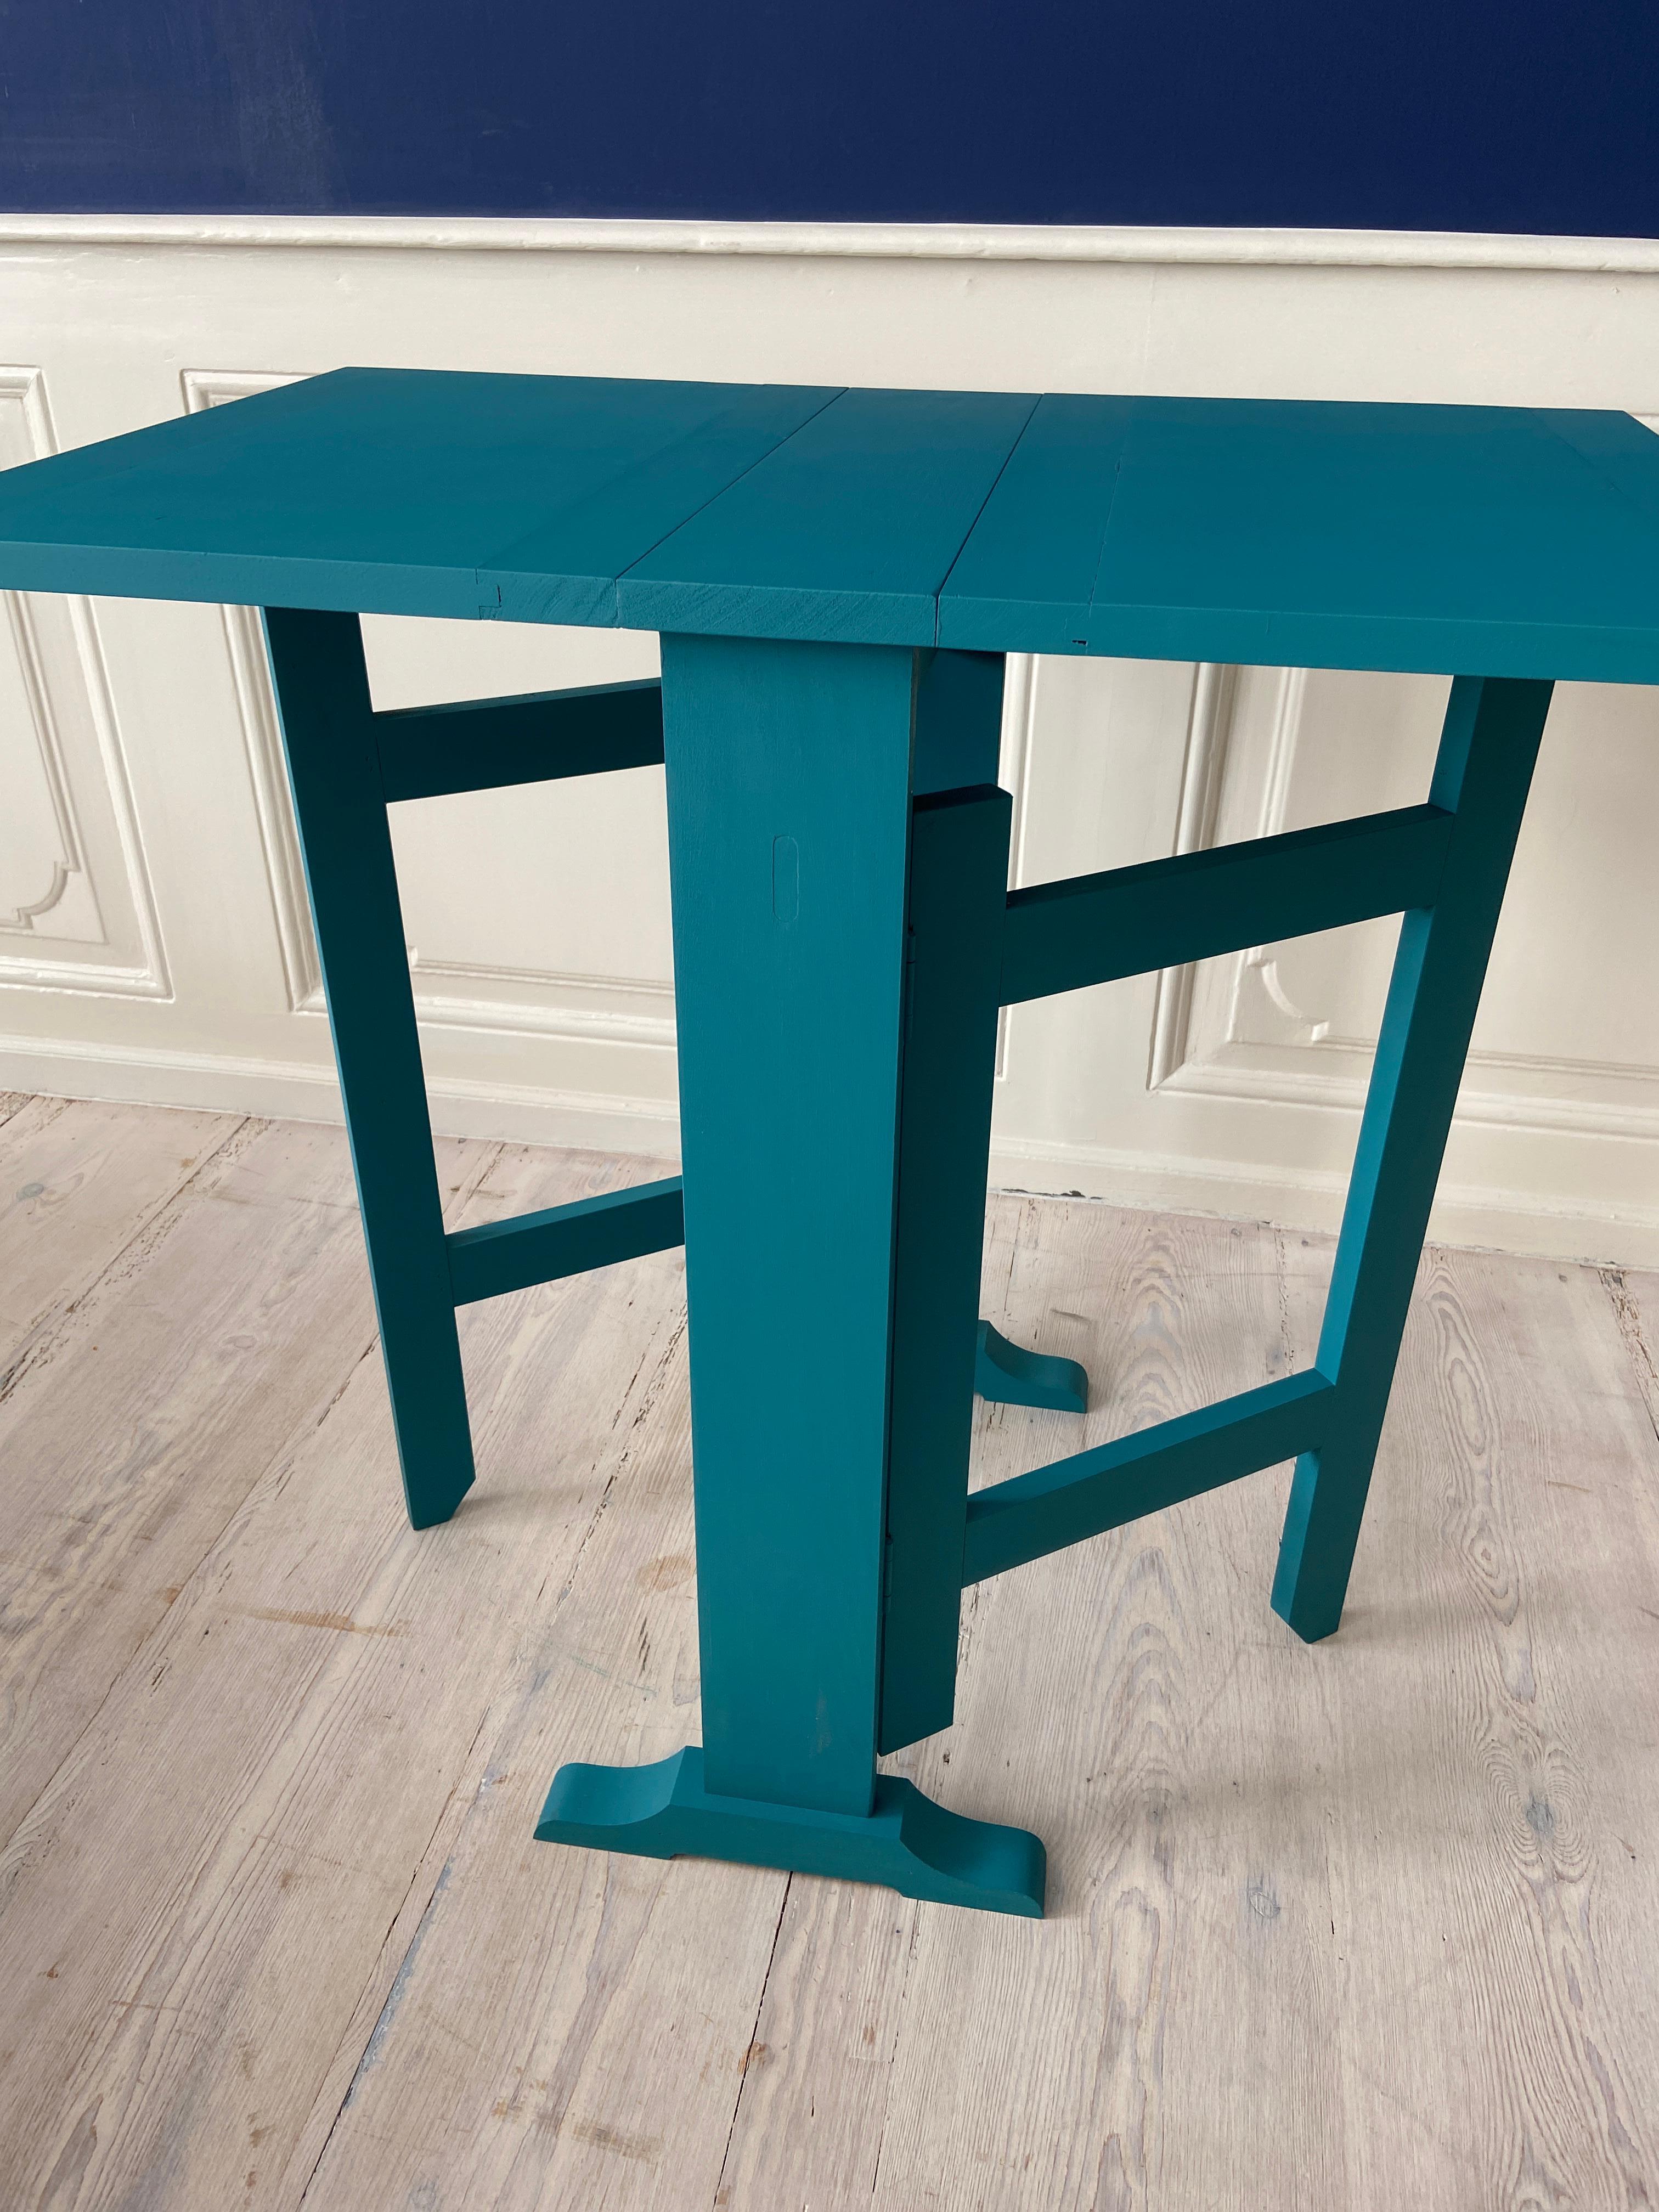 Contemporary Drop Leaf Table in Petrol Blue Painted Wood, Belgium 2